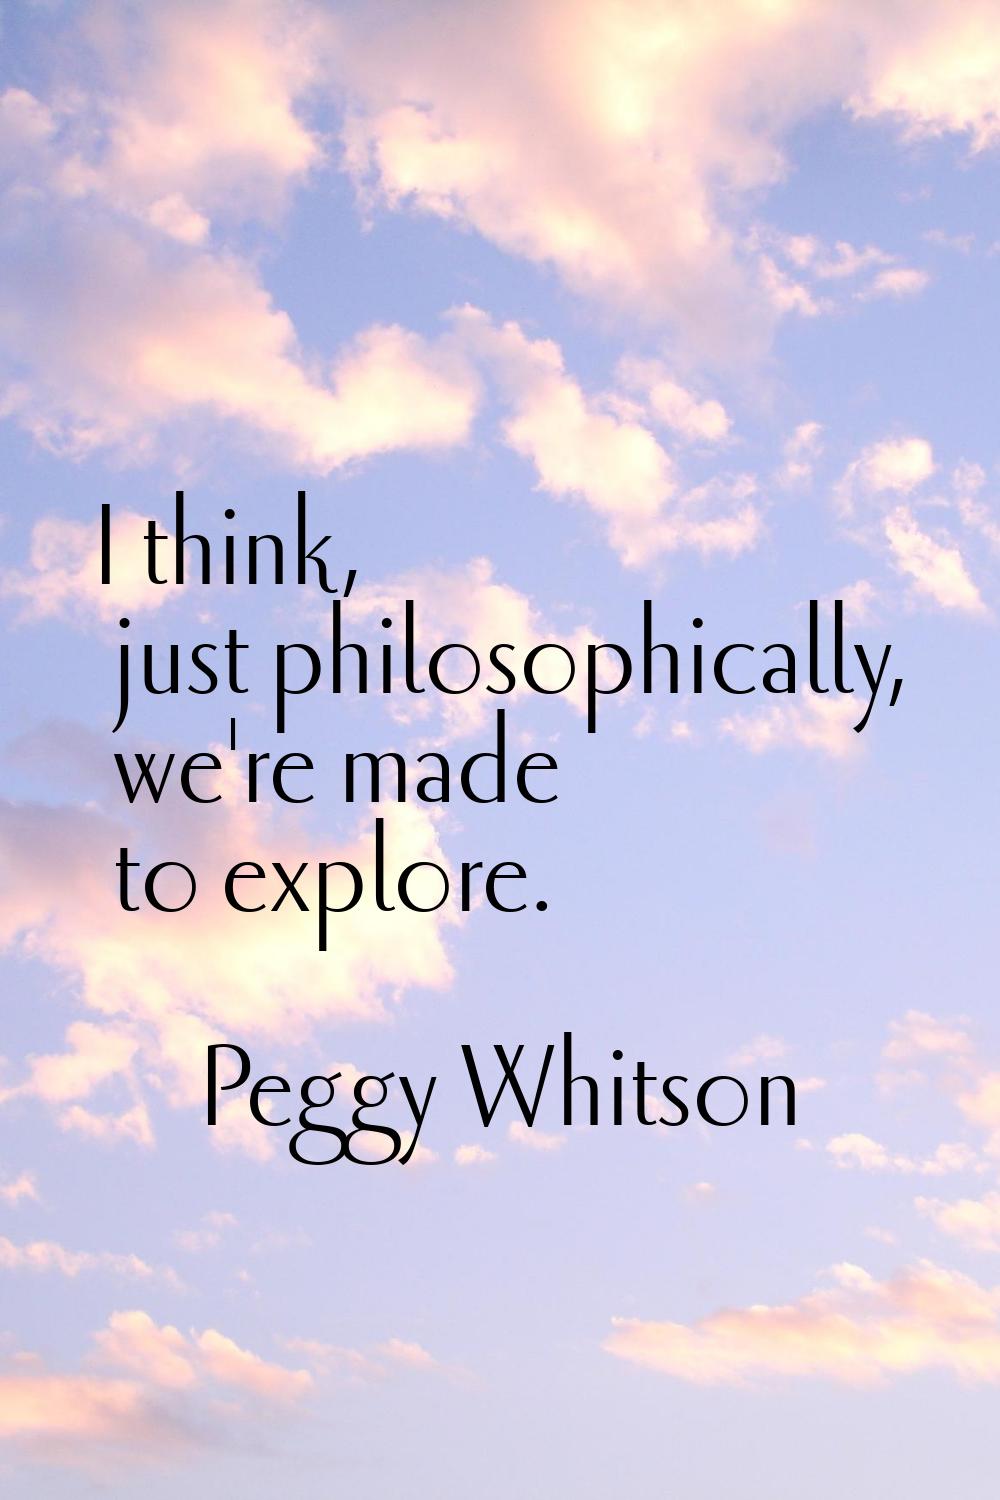 I think, just philosophically, we're made to explore.